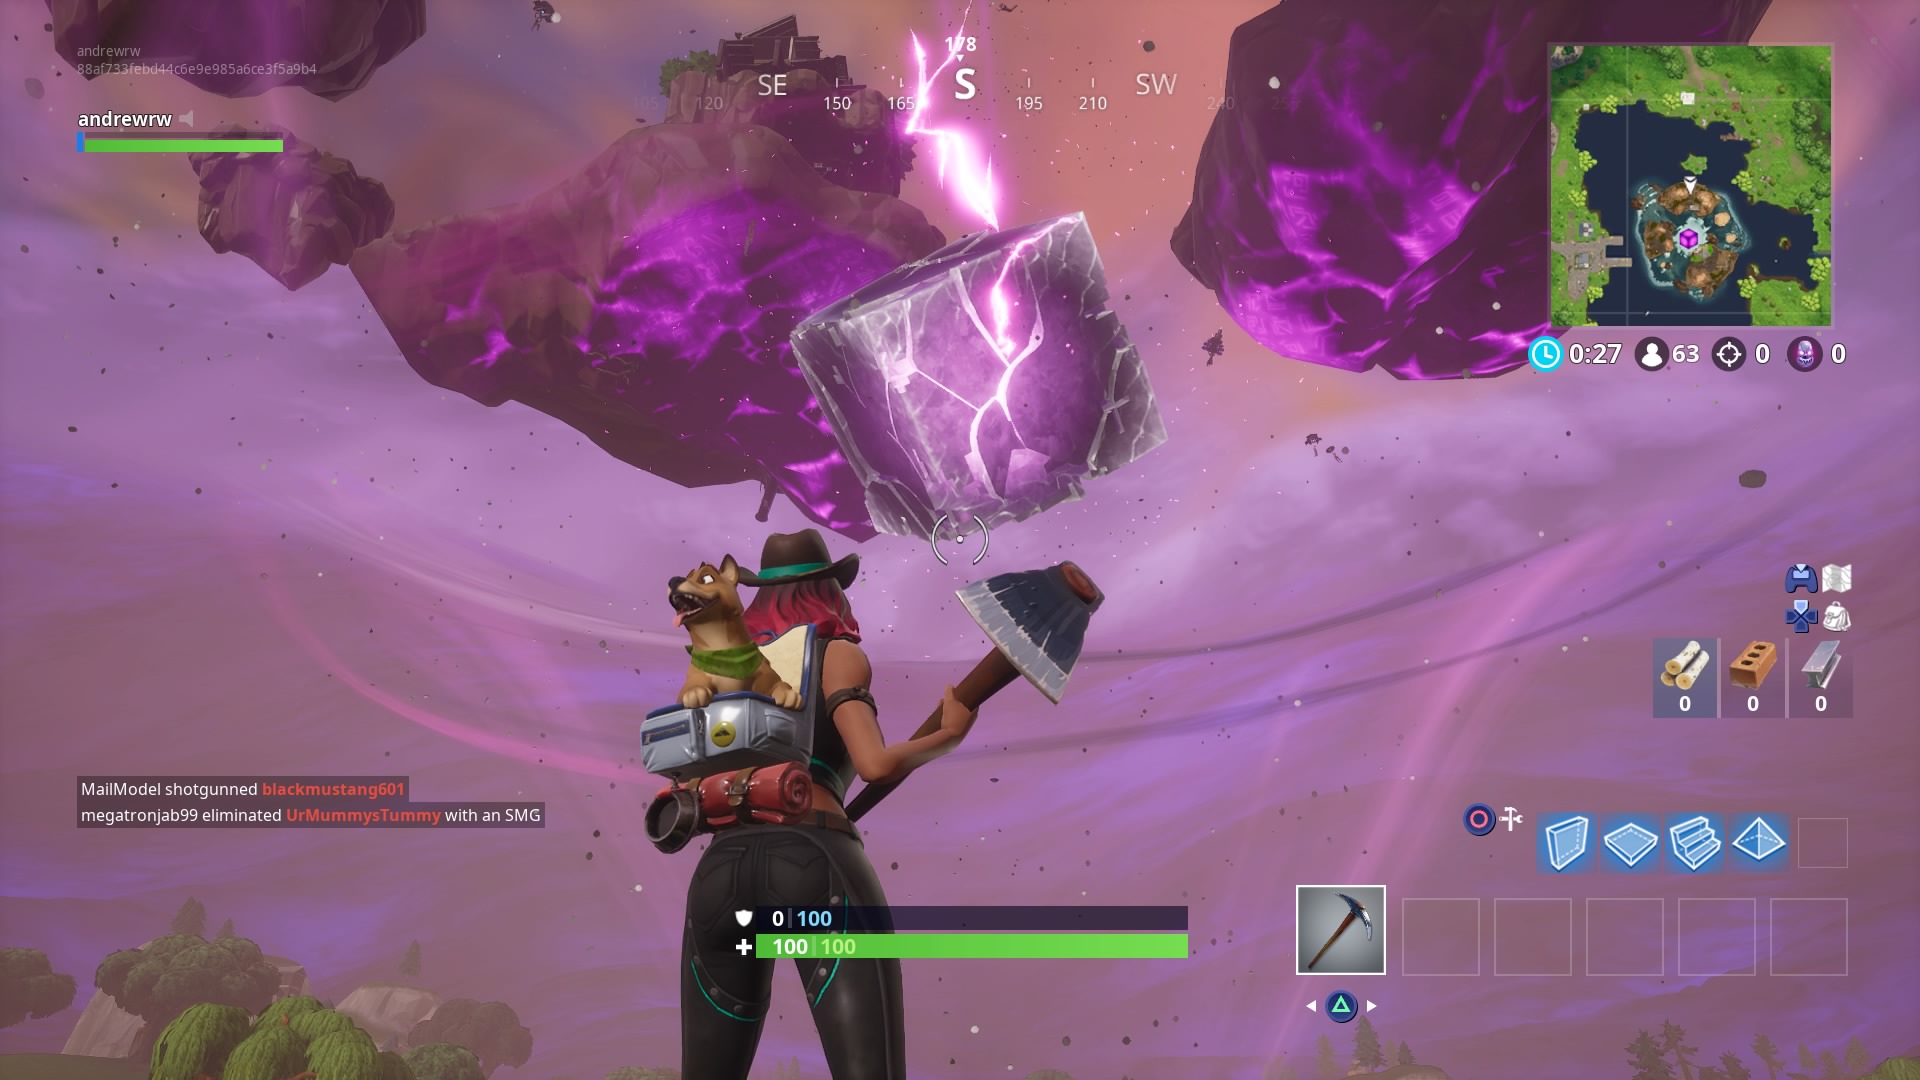 Fortnite Event Made the Cube Explode and Changed Loot Lake